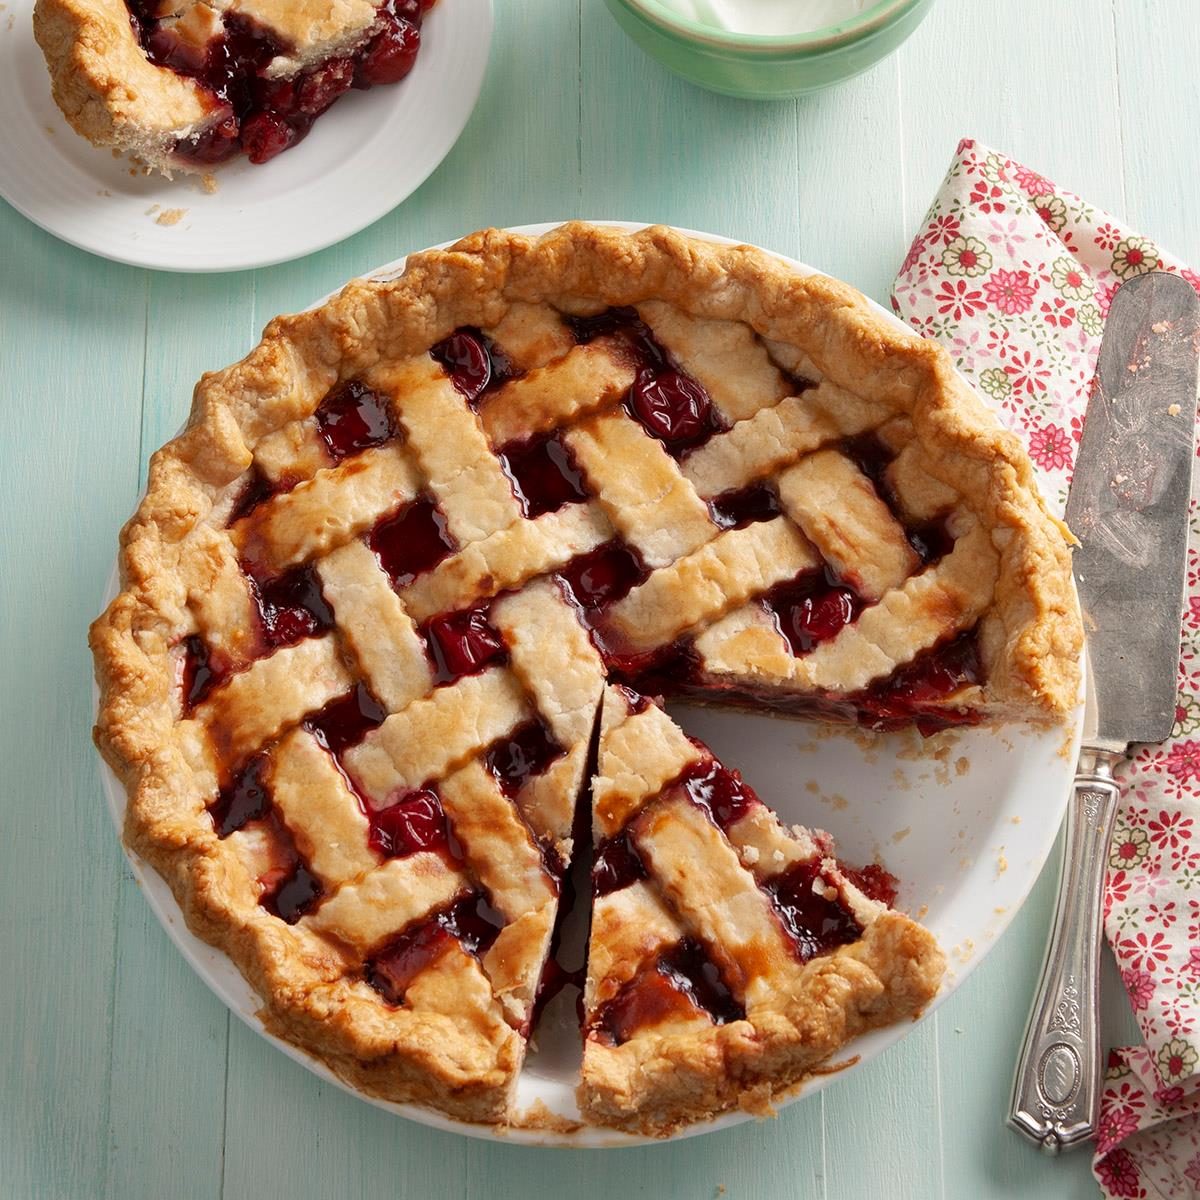 How To Store A Cherry Pie